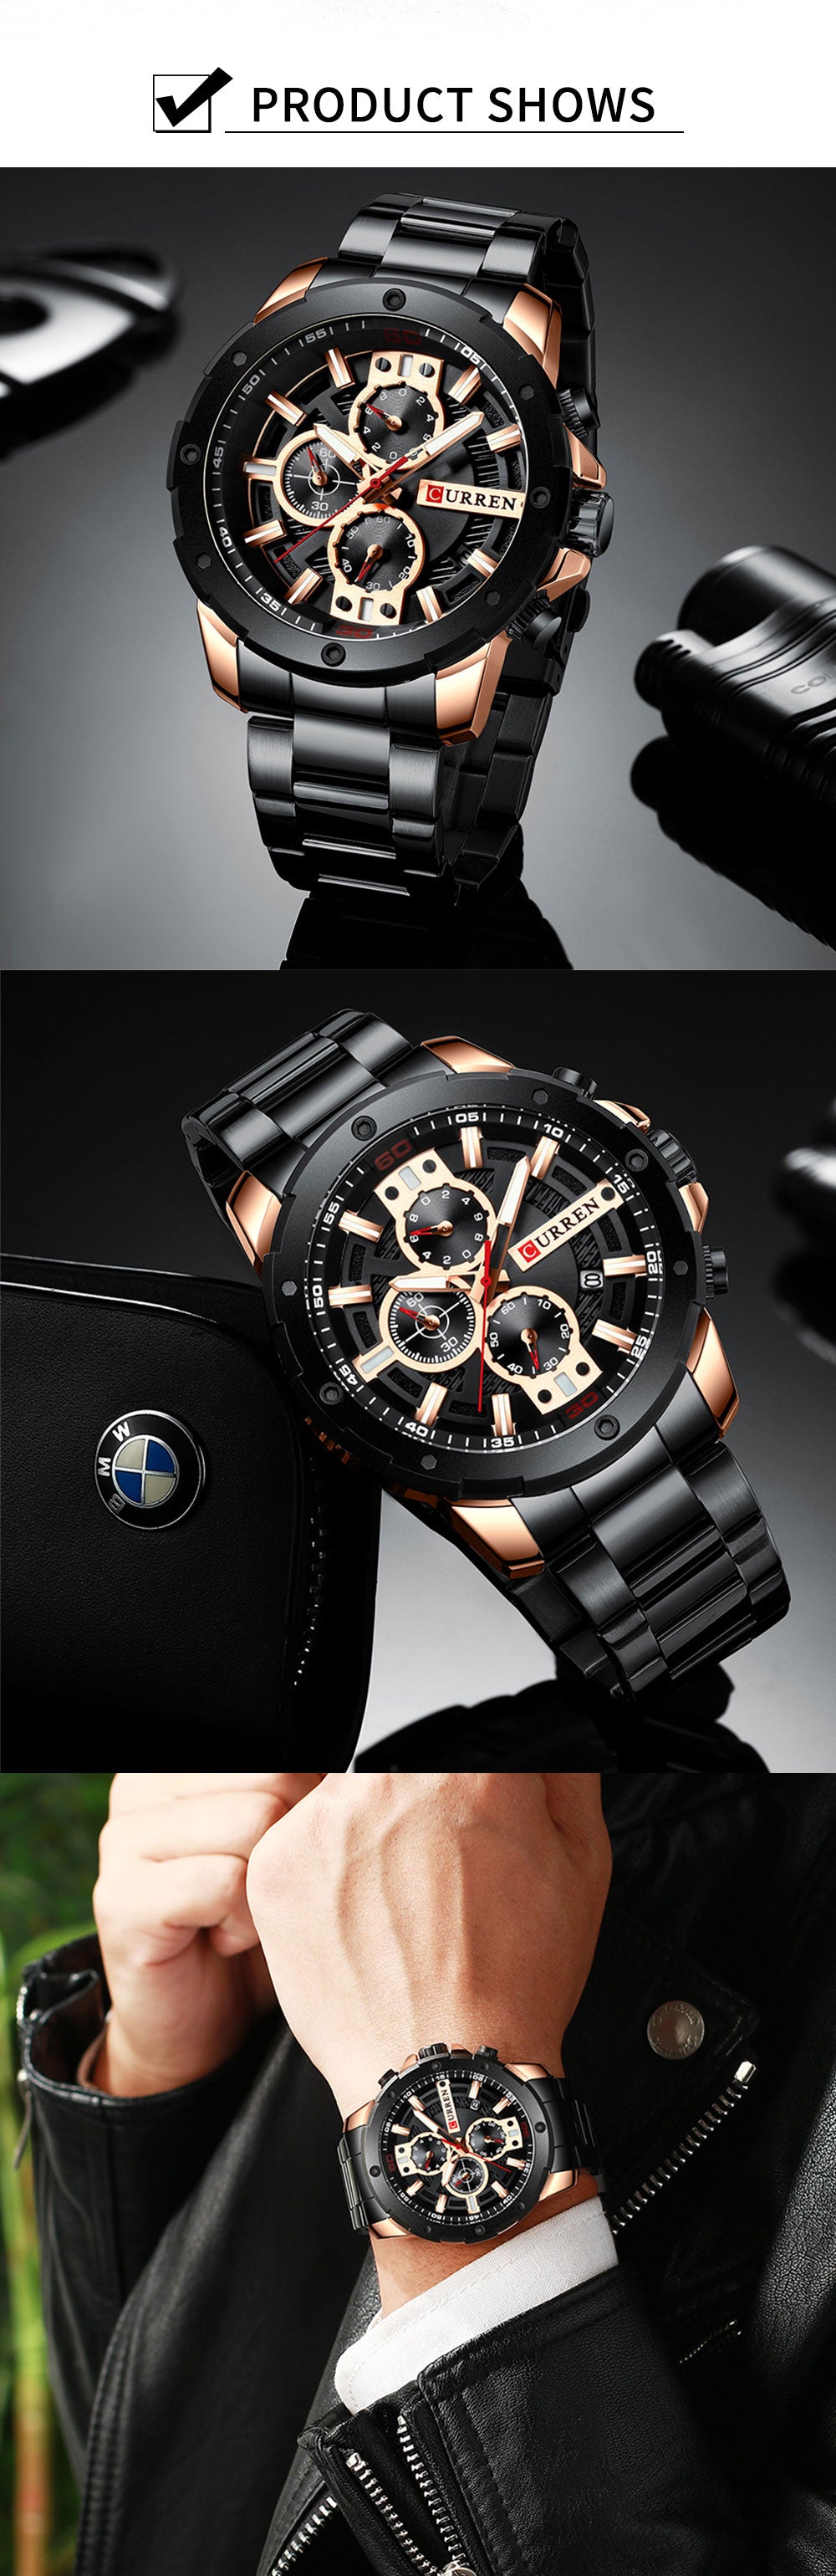 YSYH Watches Men Stainless Steel Band Quartz Wristwatch Military Chronograph Clock Male  Sporty Watch Waterproof 8336